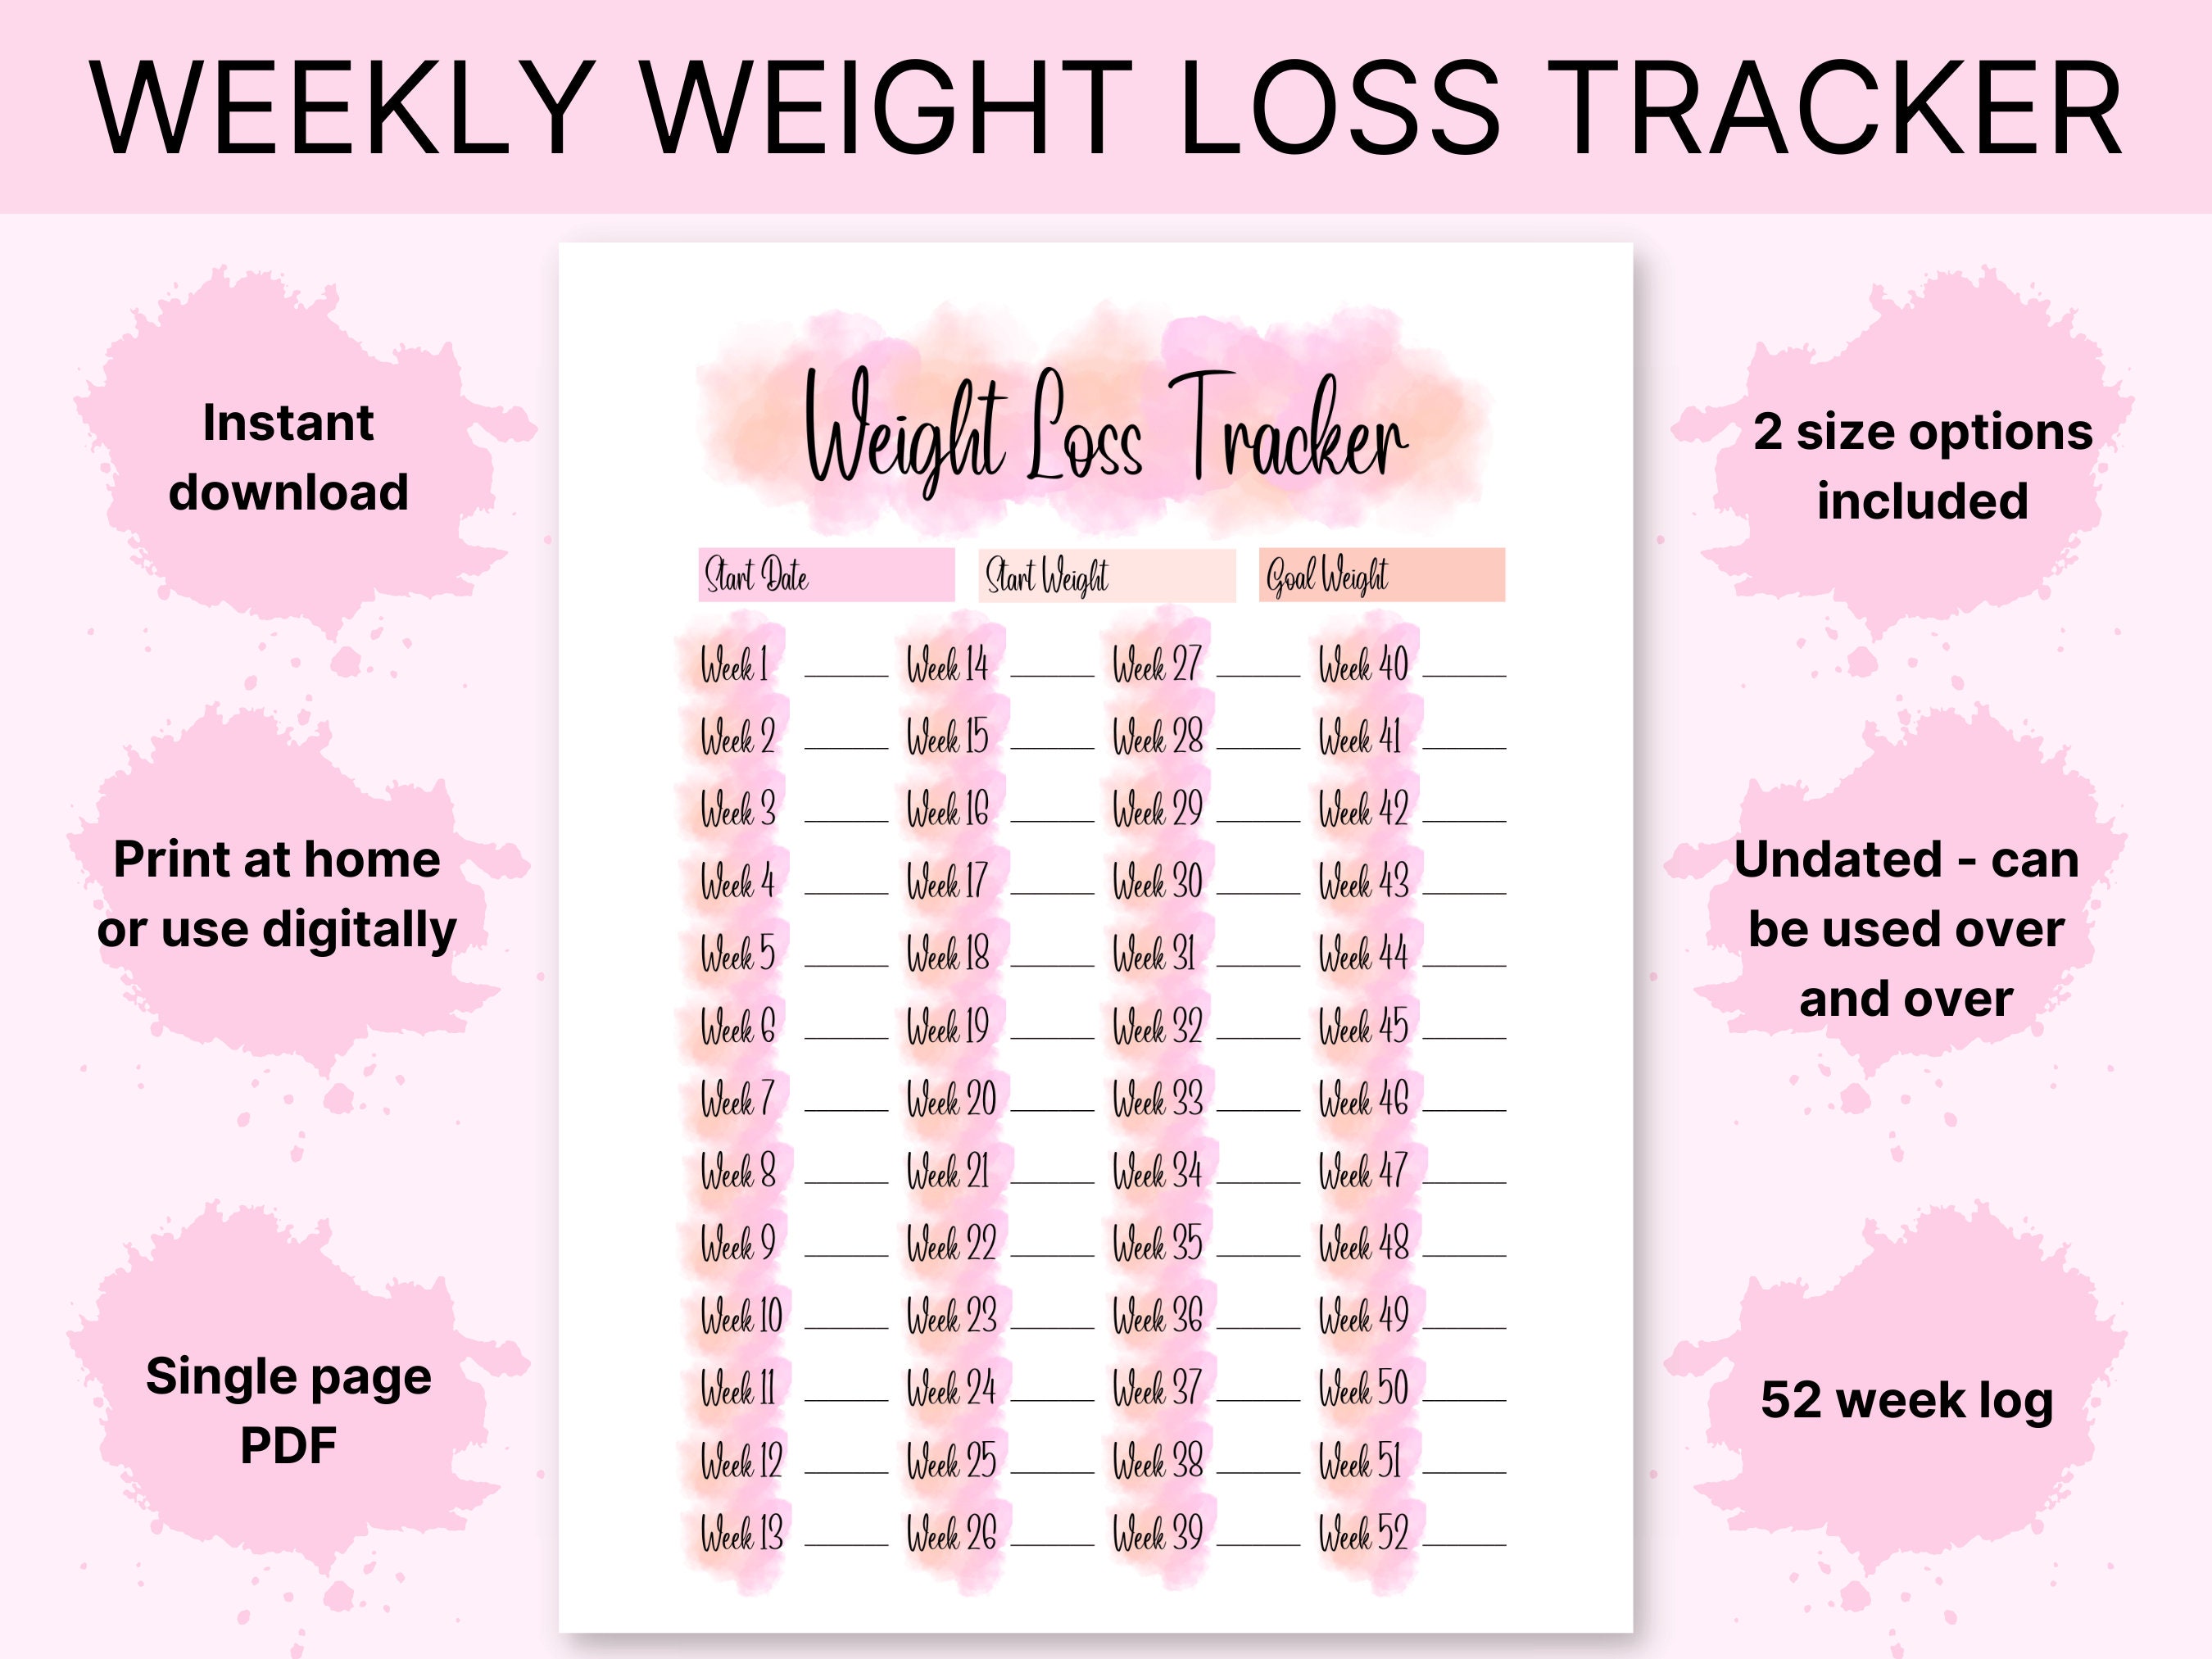 Weight Loss Tracker Printable Digital Weight Loss Journal Weekly Weigh ...